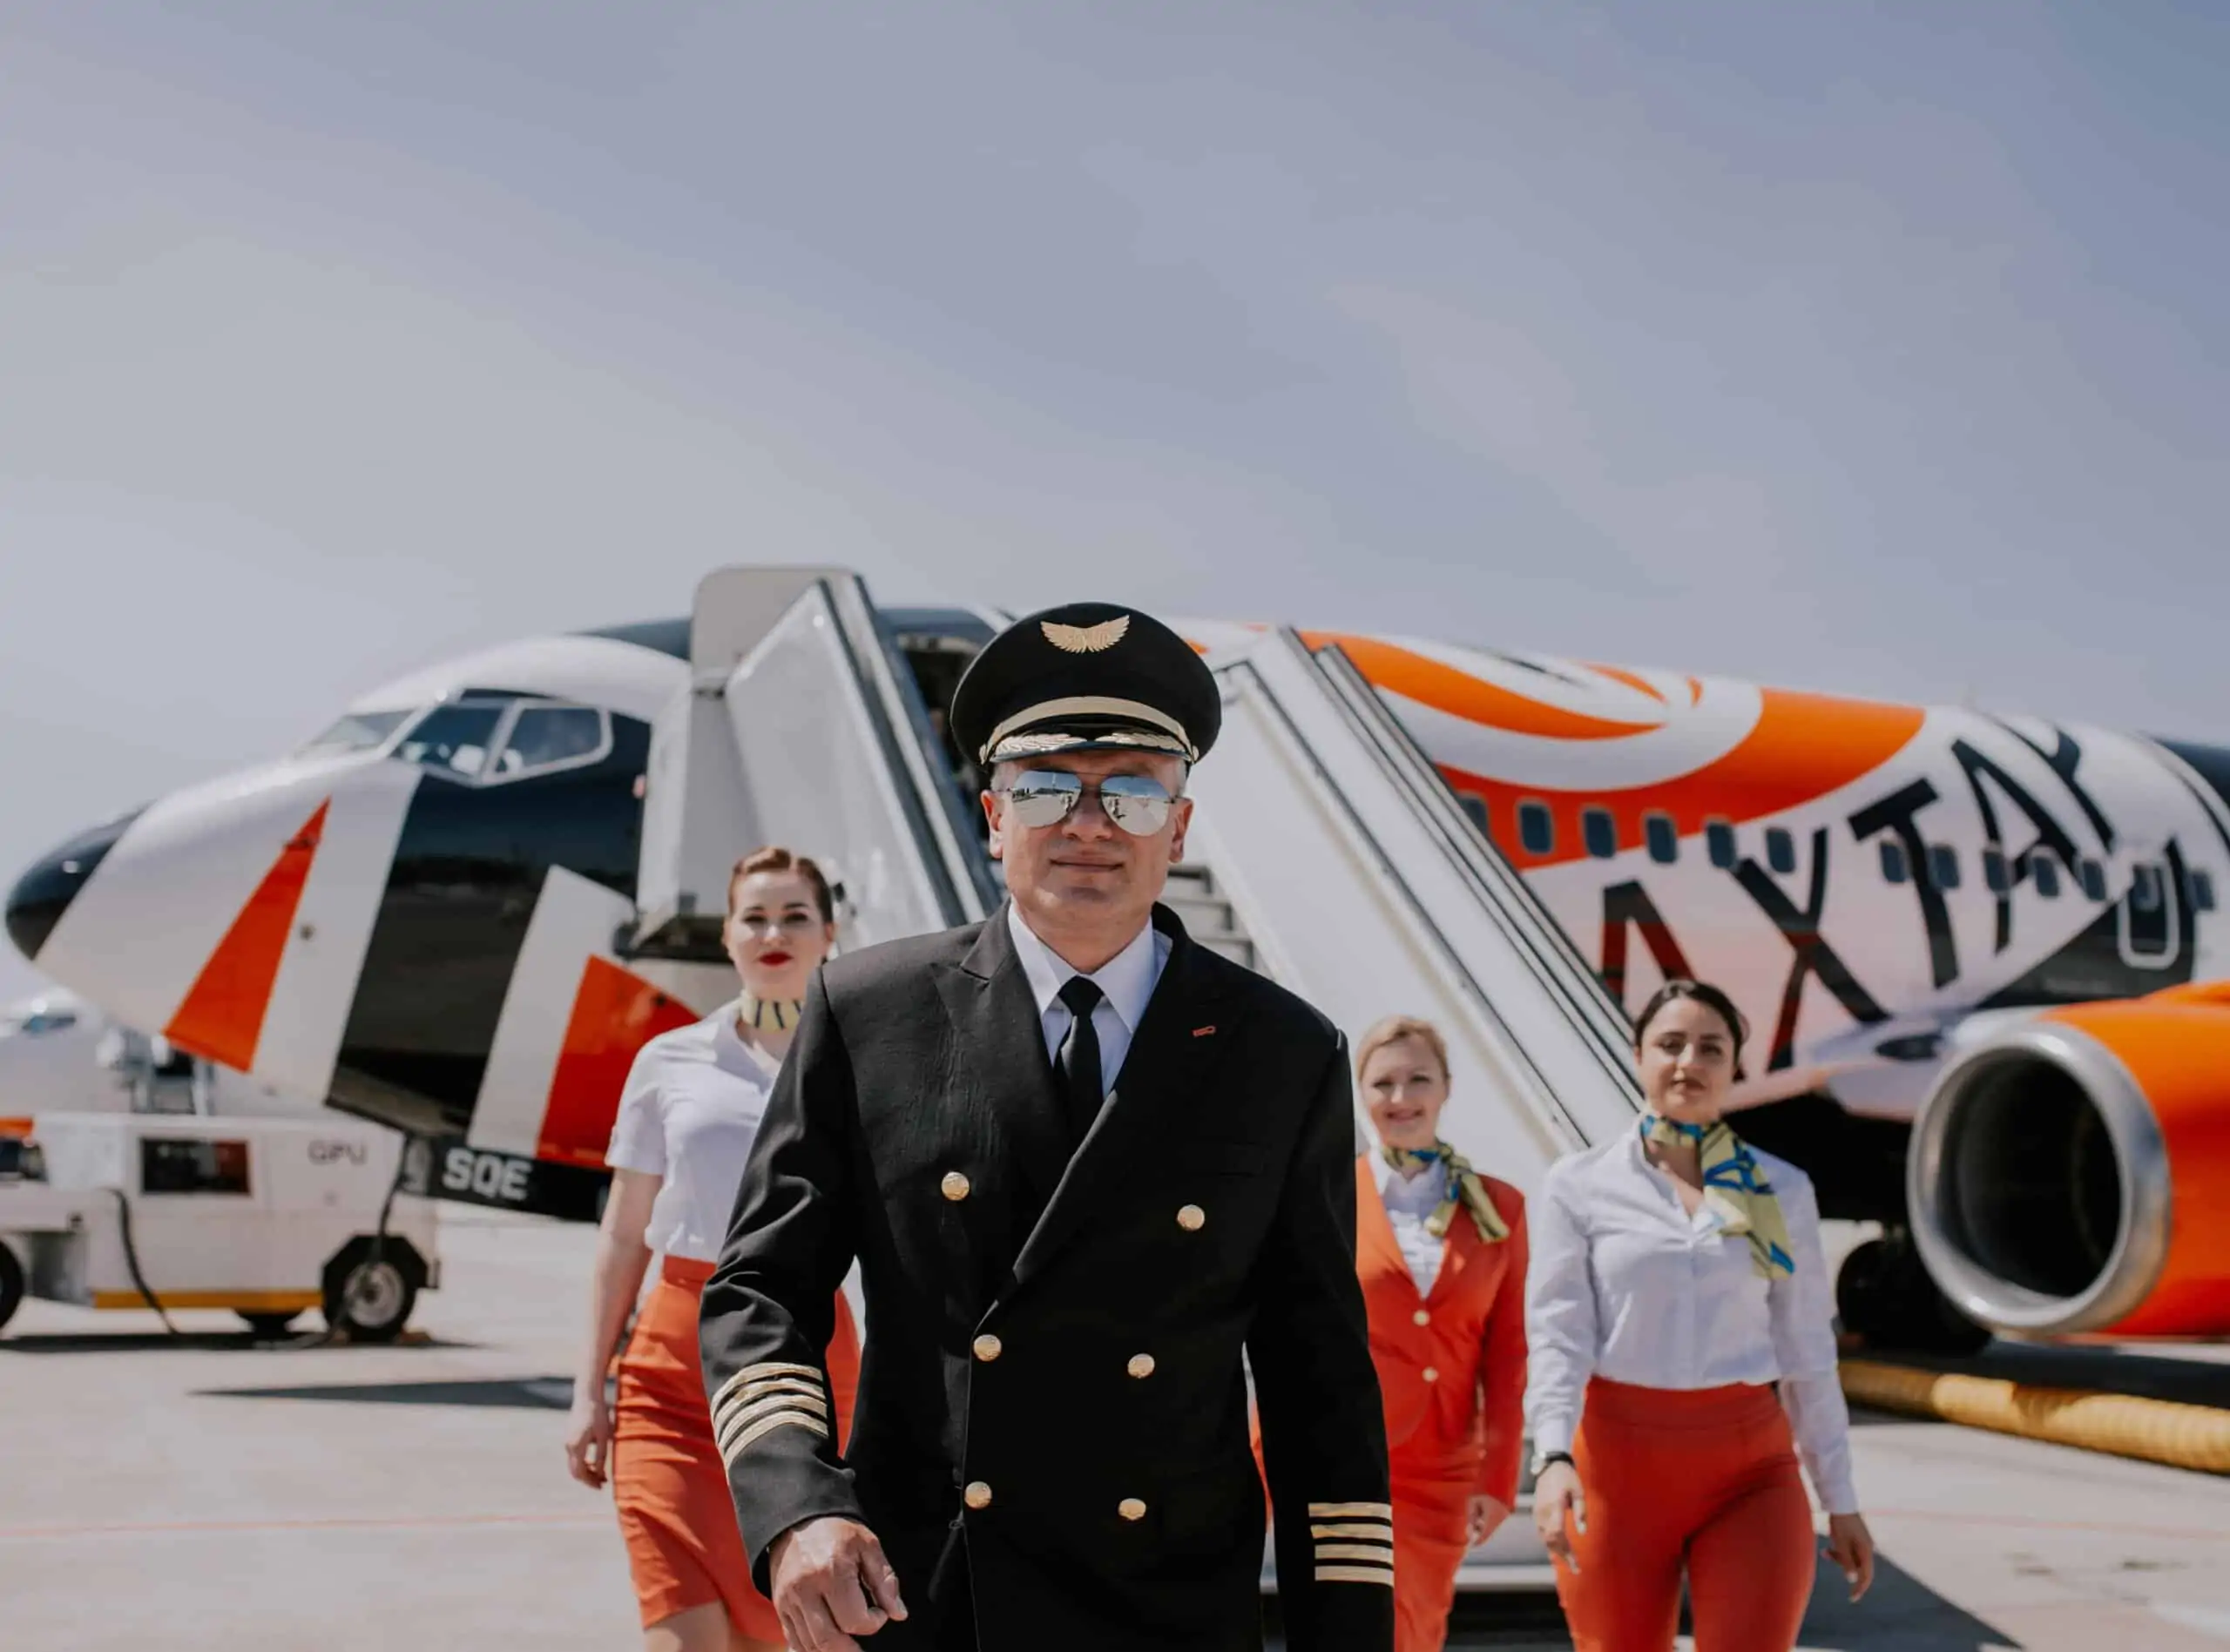 SkyUp Airlines will fly to 5 Greek islands in summer 2021